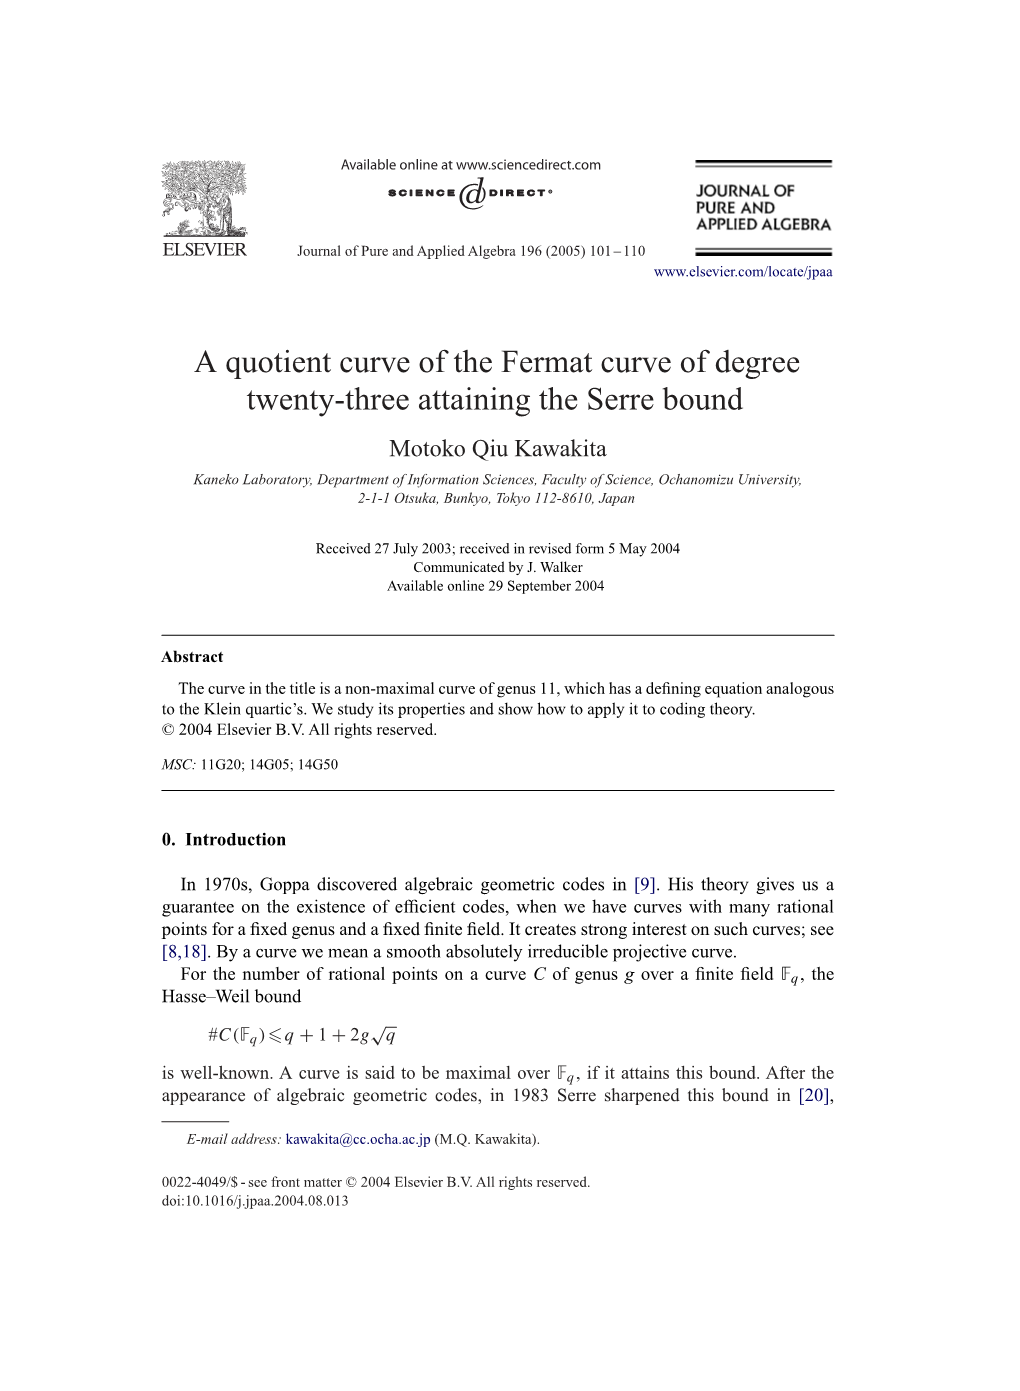 A Quotient Curve of the Fermat Curve of Degree Twenty-Three Attaining The